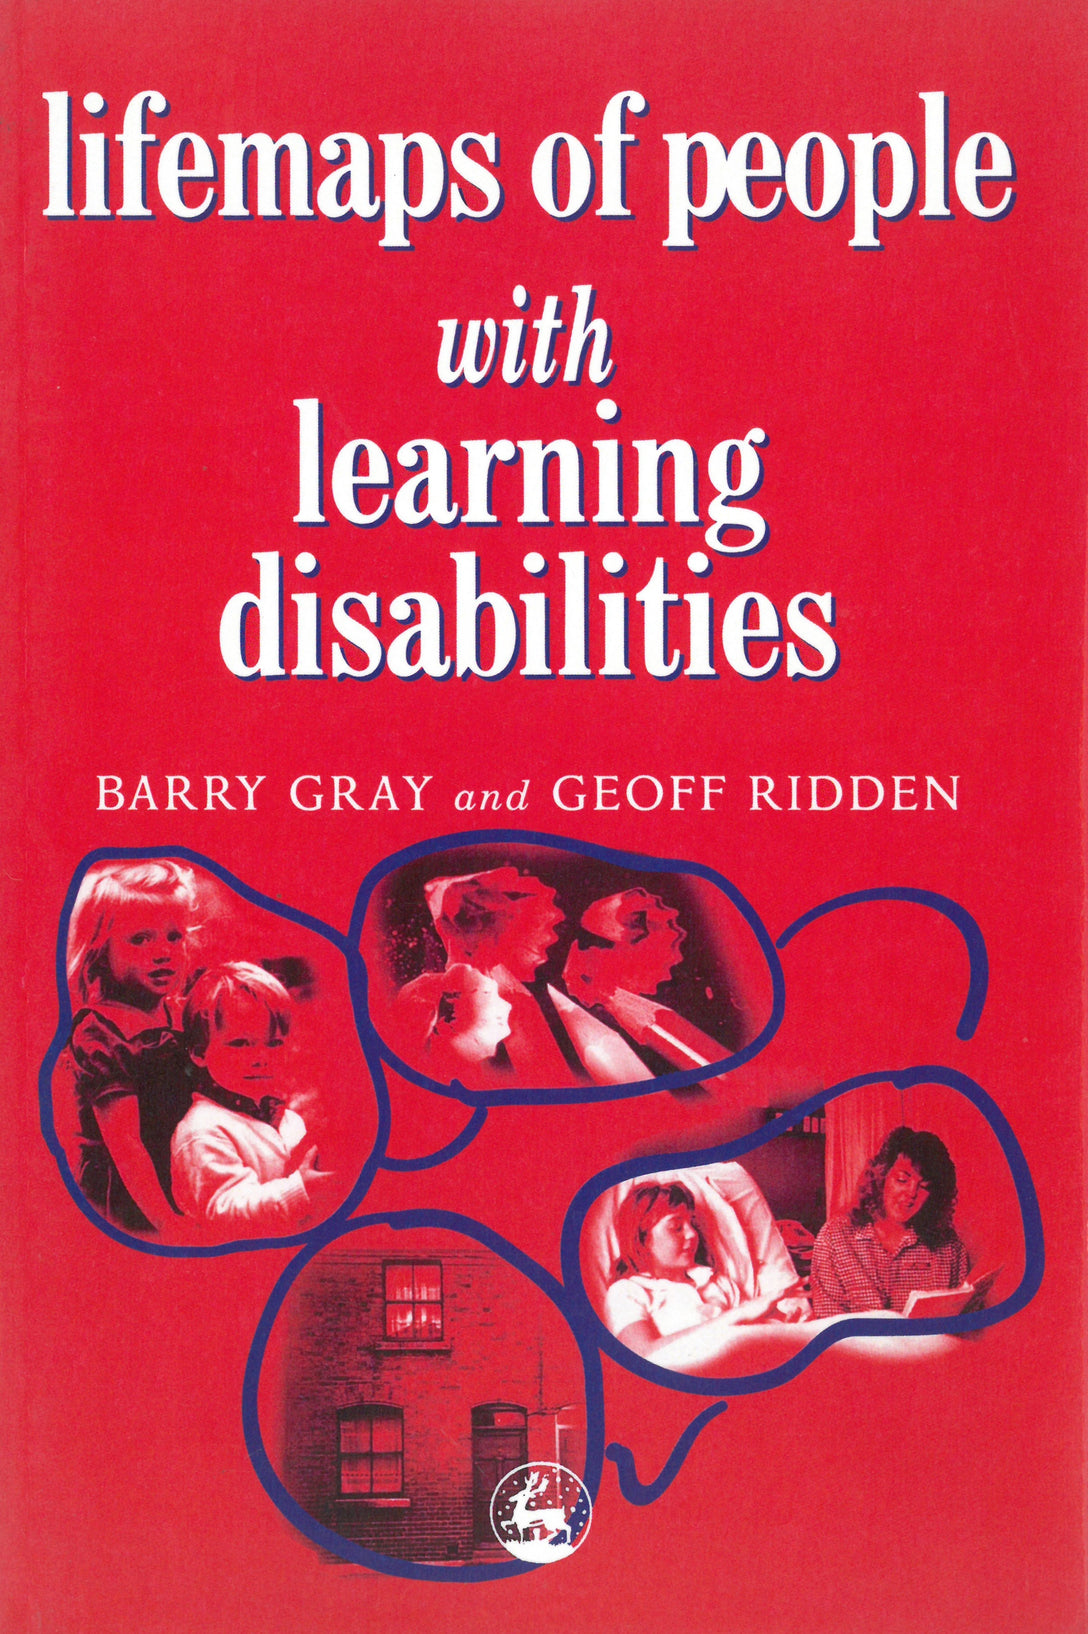 Lifemaps of People with Learning Disabilities by Geoff Ridden, Barry Gray